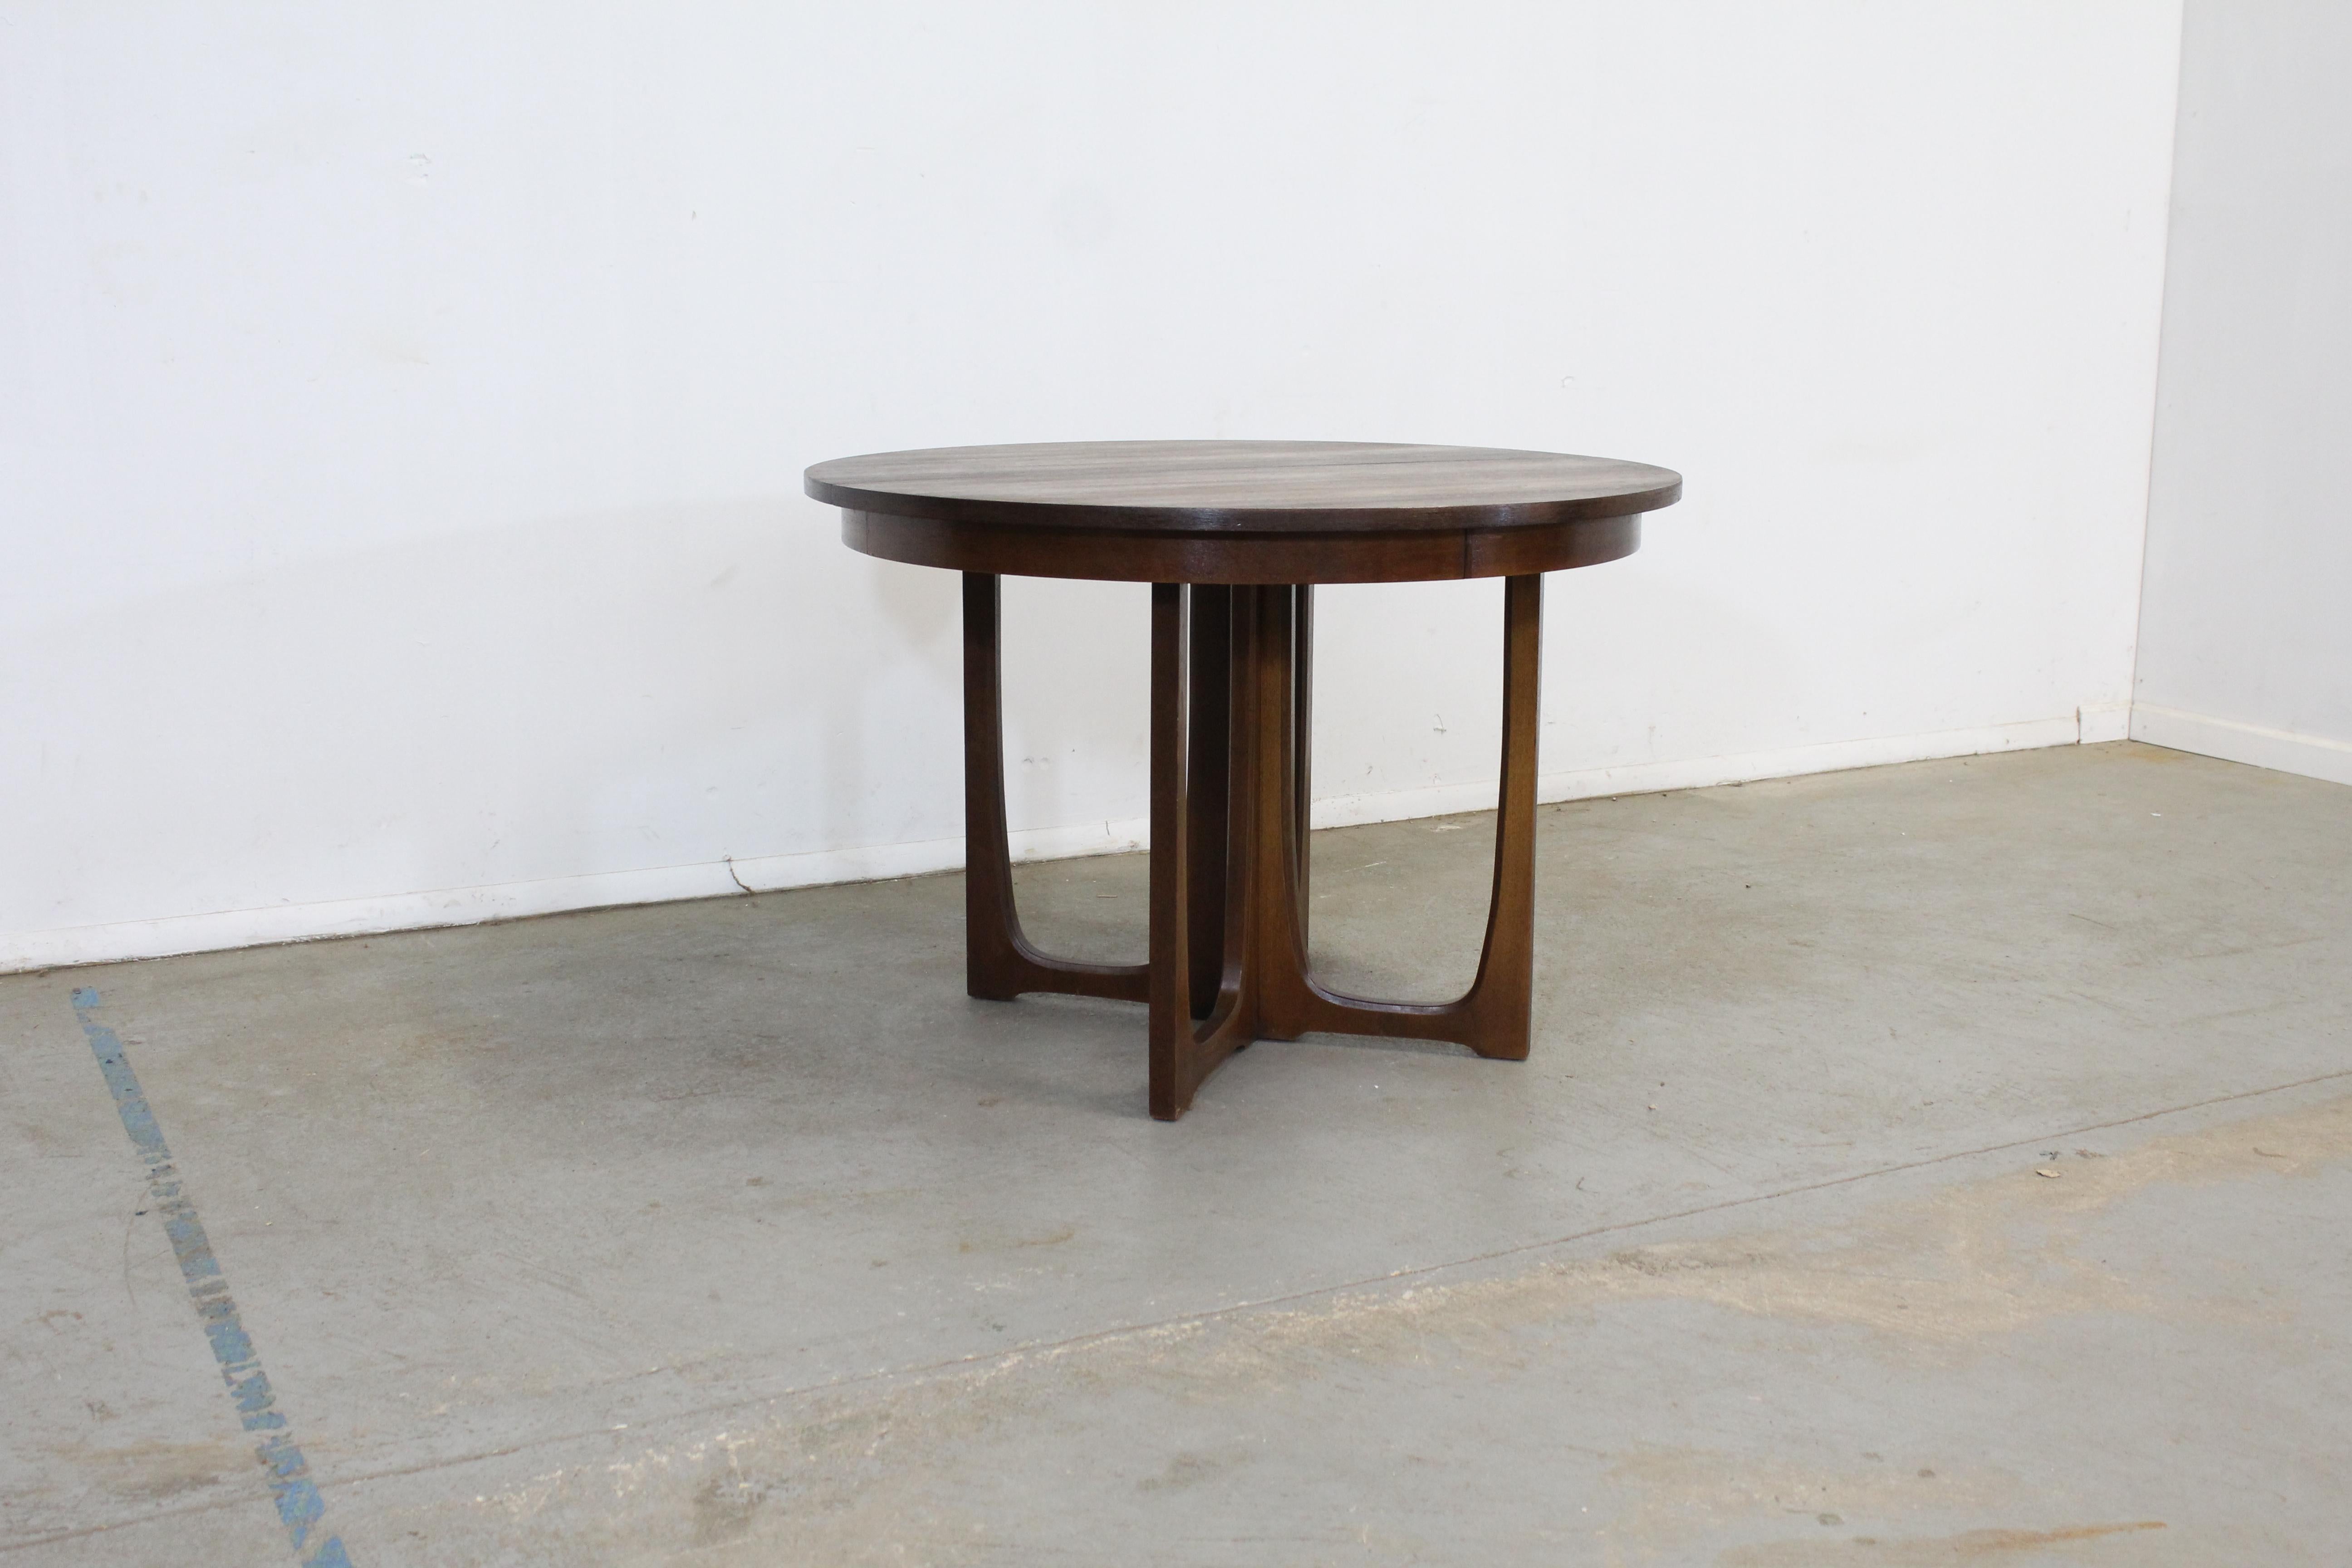 Mid-Century Modern round walnut brasilia dining table w sculpted base

Offered is a vintage Mid-Century Modern round walnut Brasilia dining table. The table is made of walnut featuring a circular table top. It is in vintage condition showing